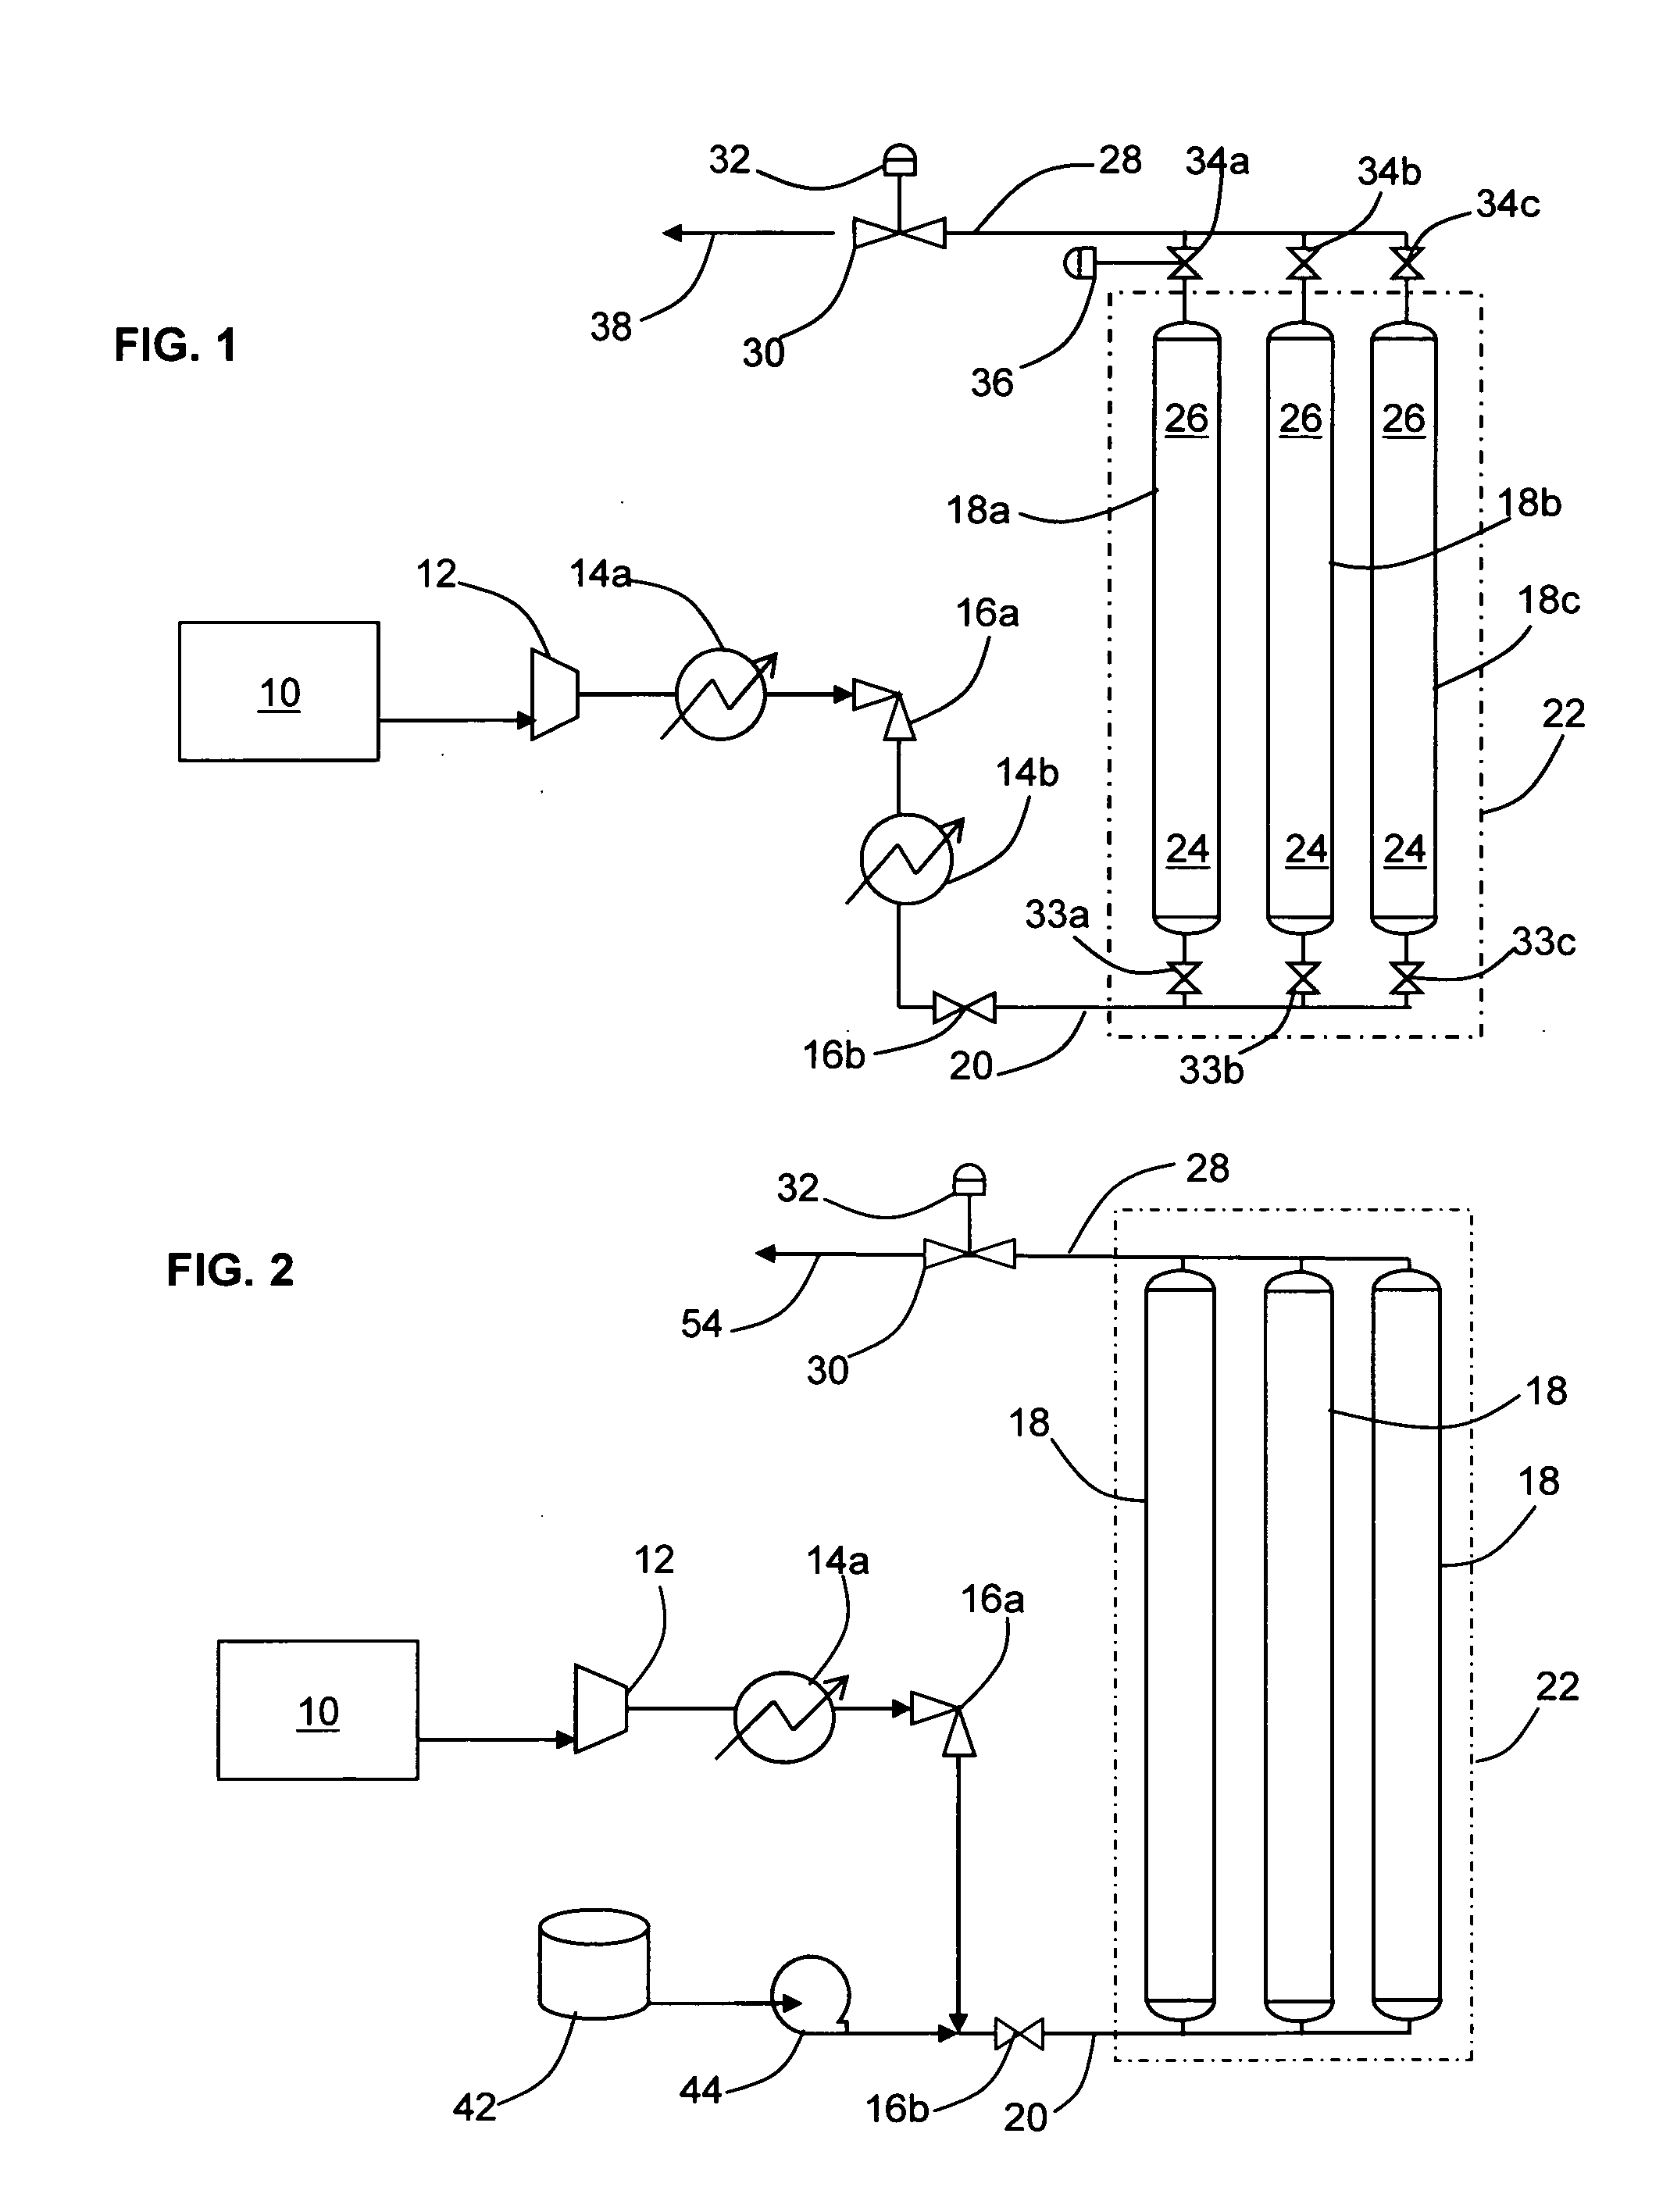 Apparatus and method for flowing compressed fluids into and out of containment